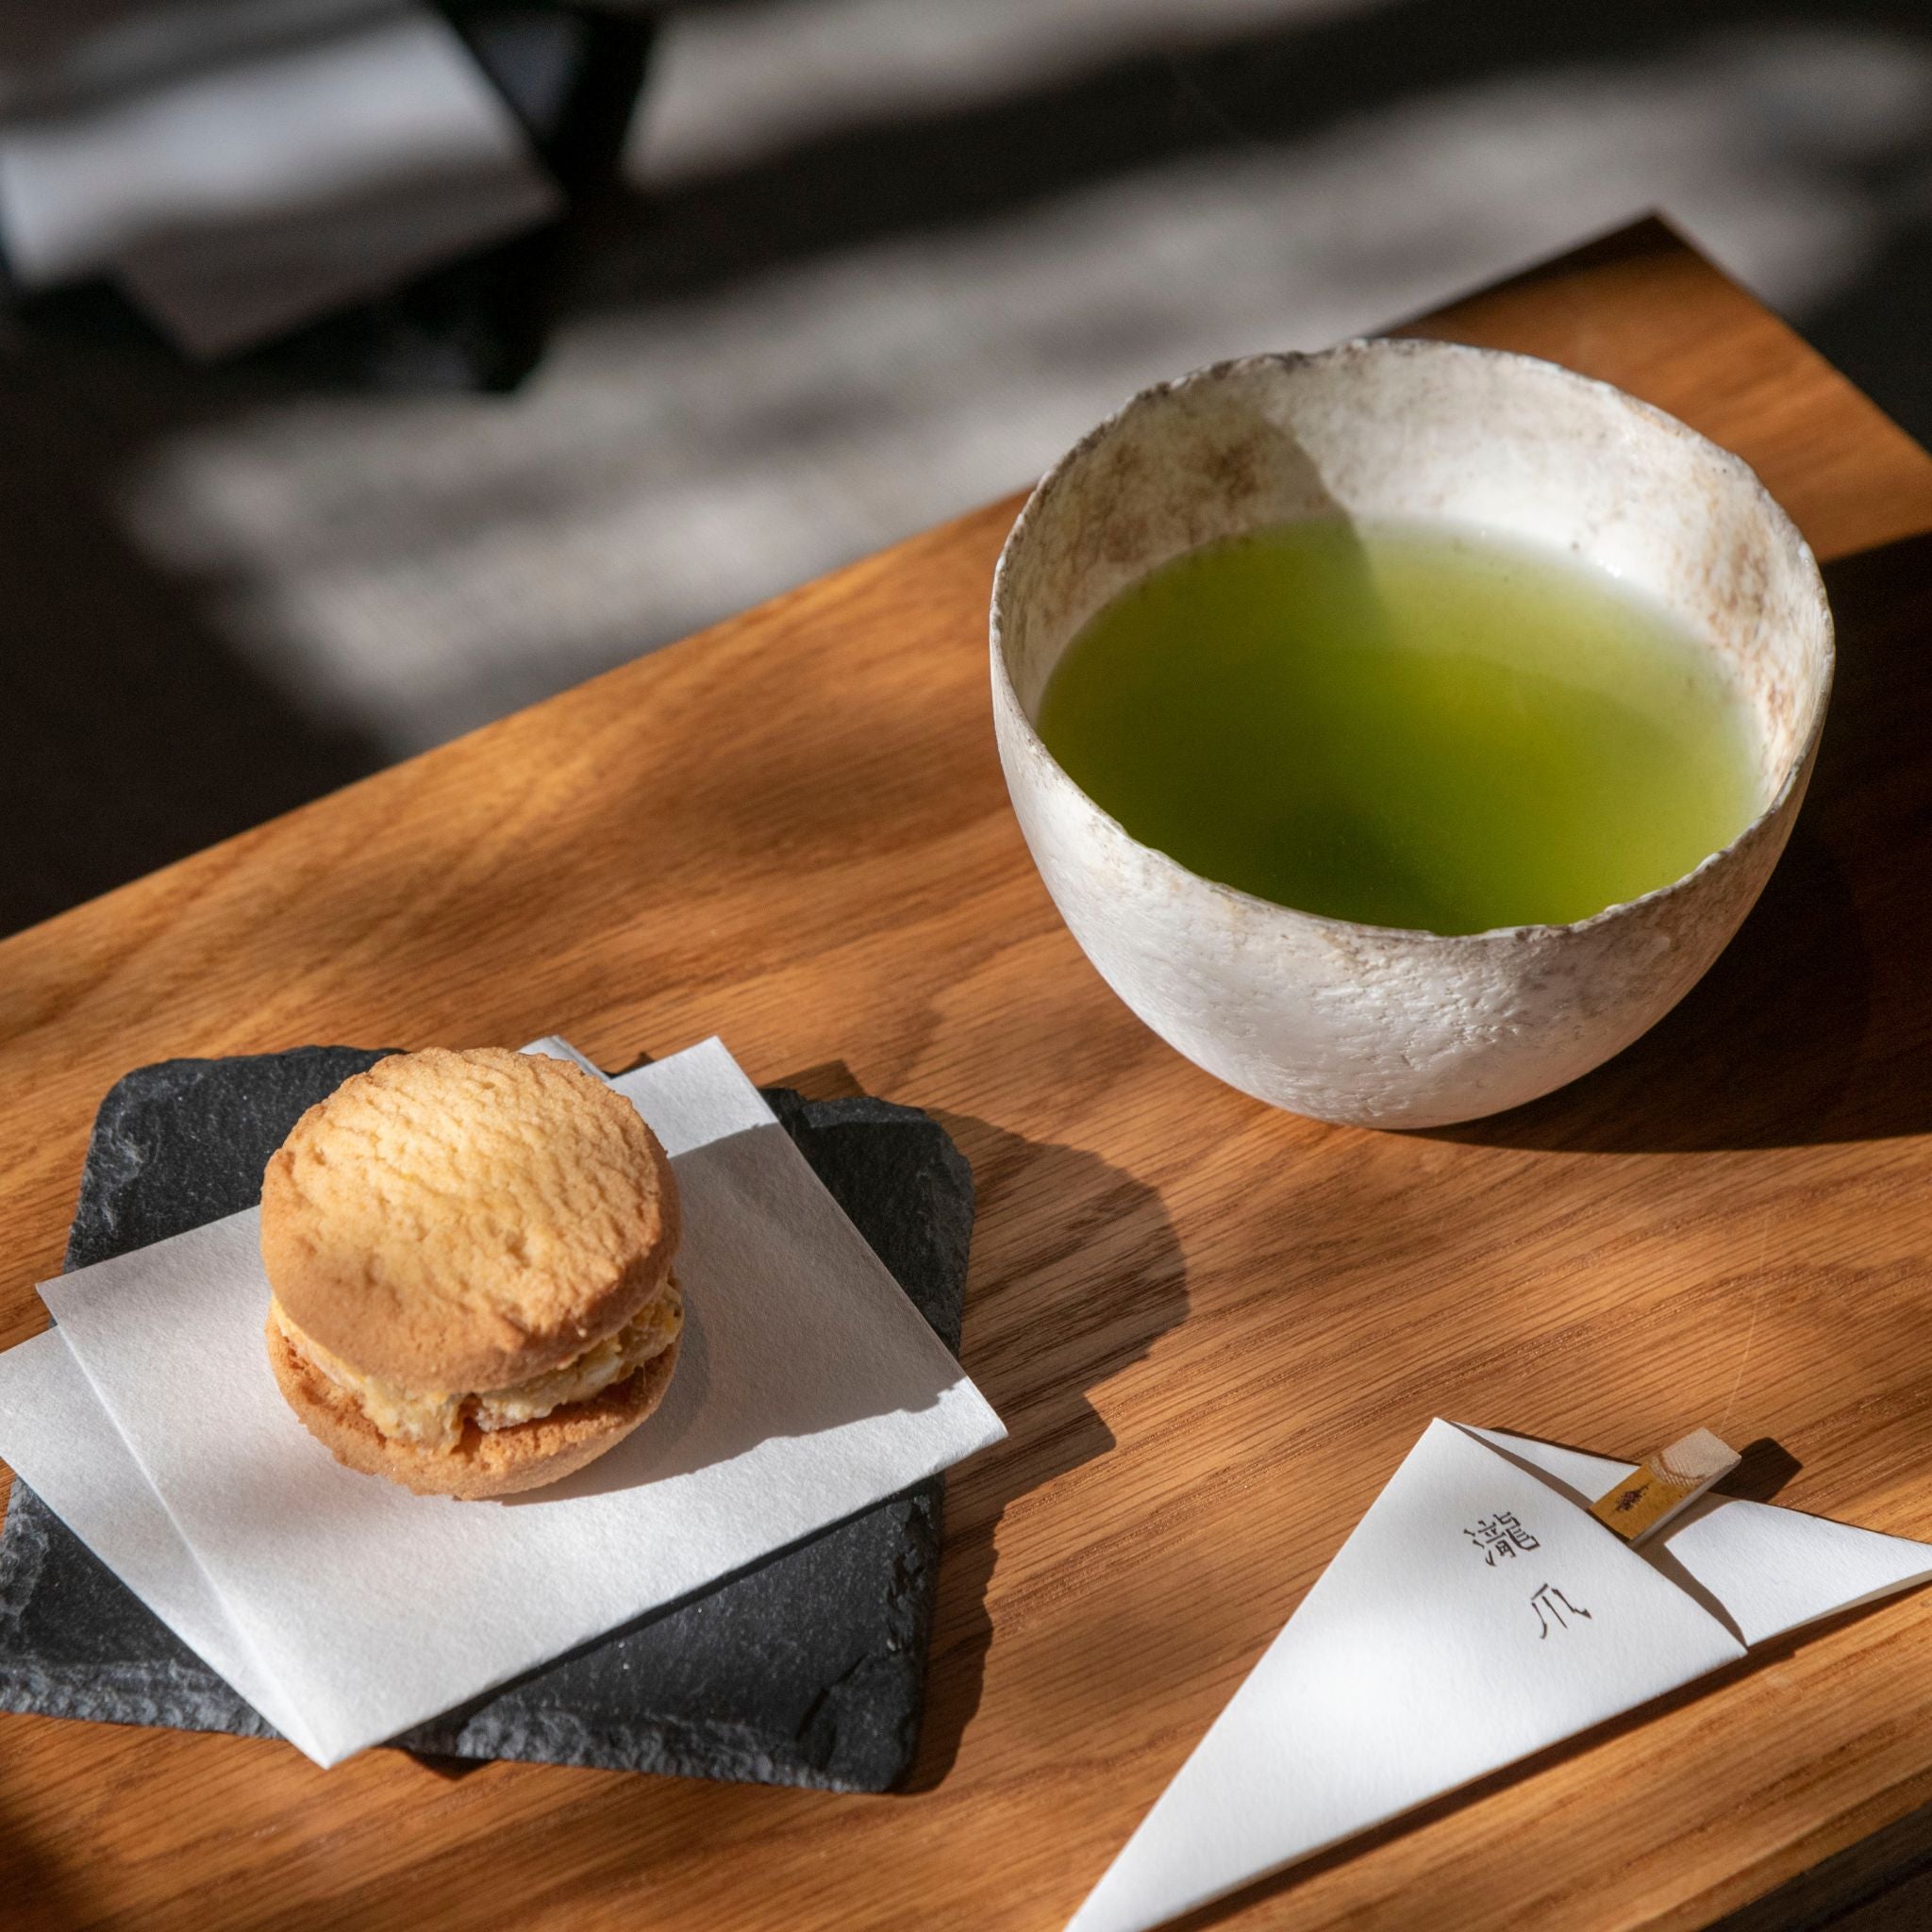 【 Welcome Tea -Experience in Japanese- 】Four types of tea and seasonal sweets (with a souvenir)